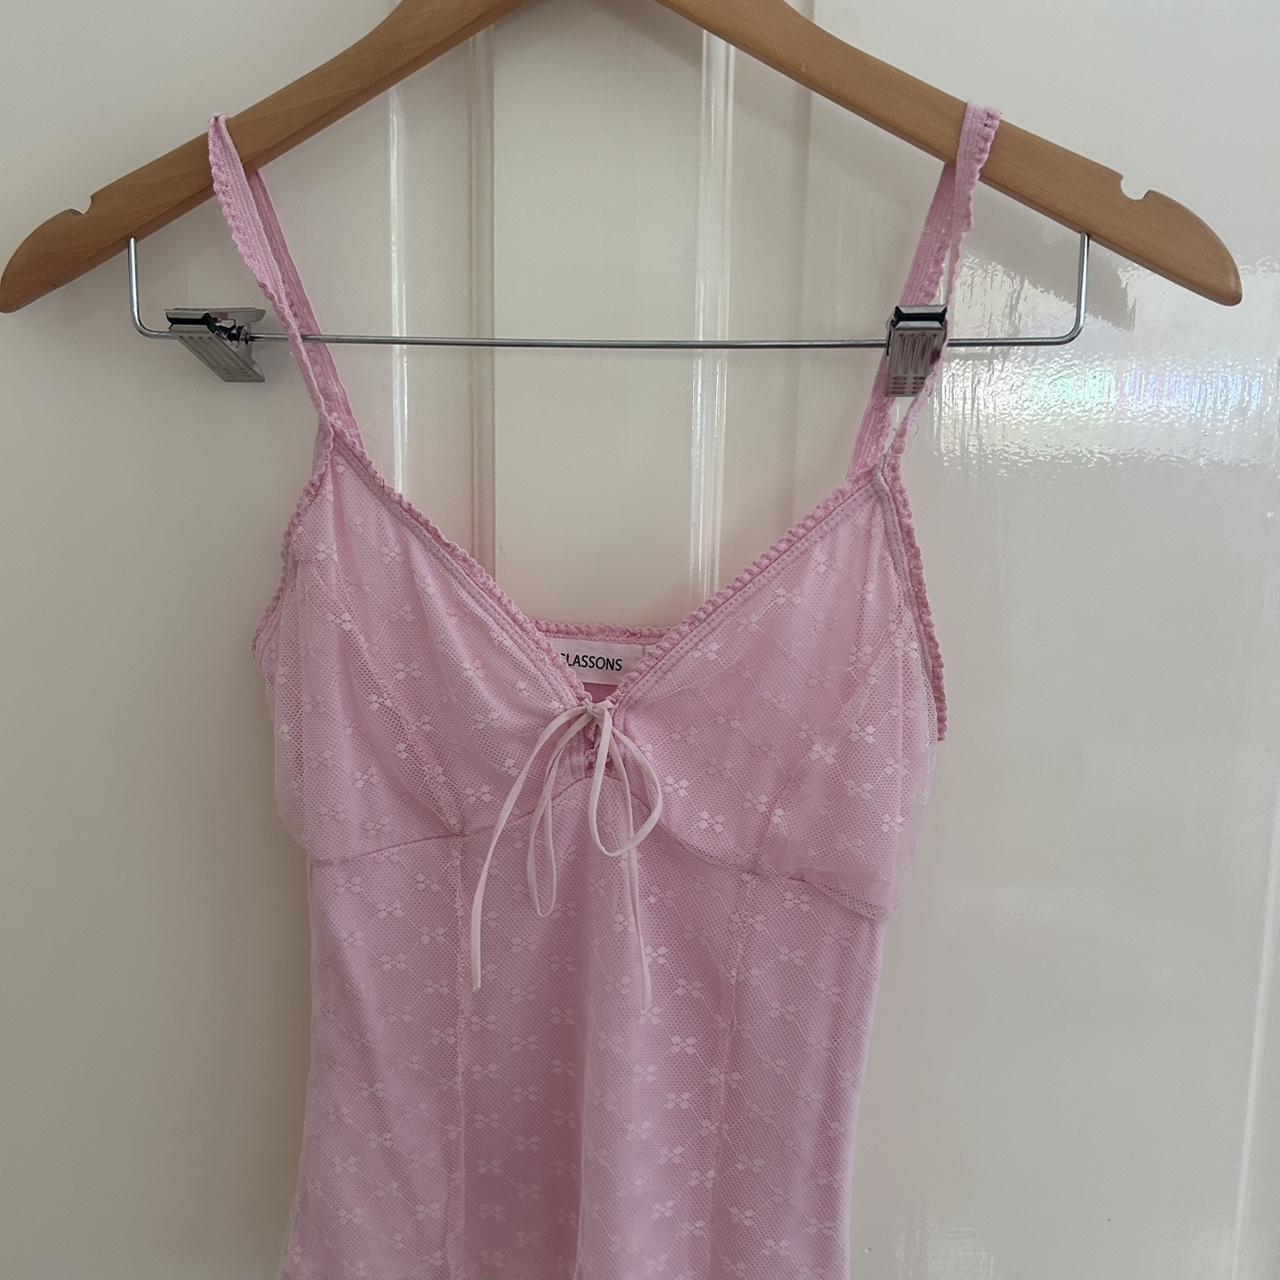 glassons pink lace cami xs good condition - Depop